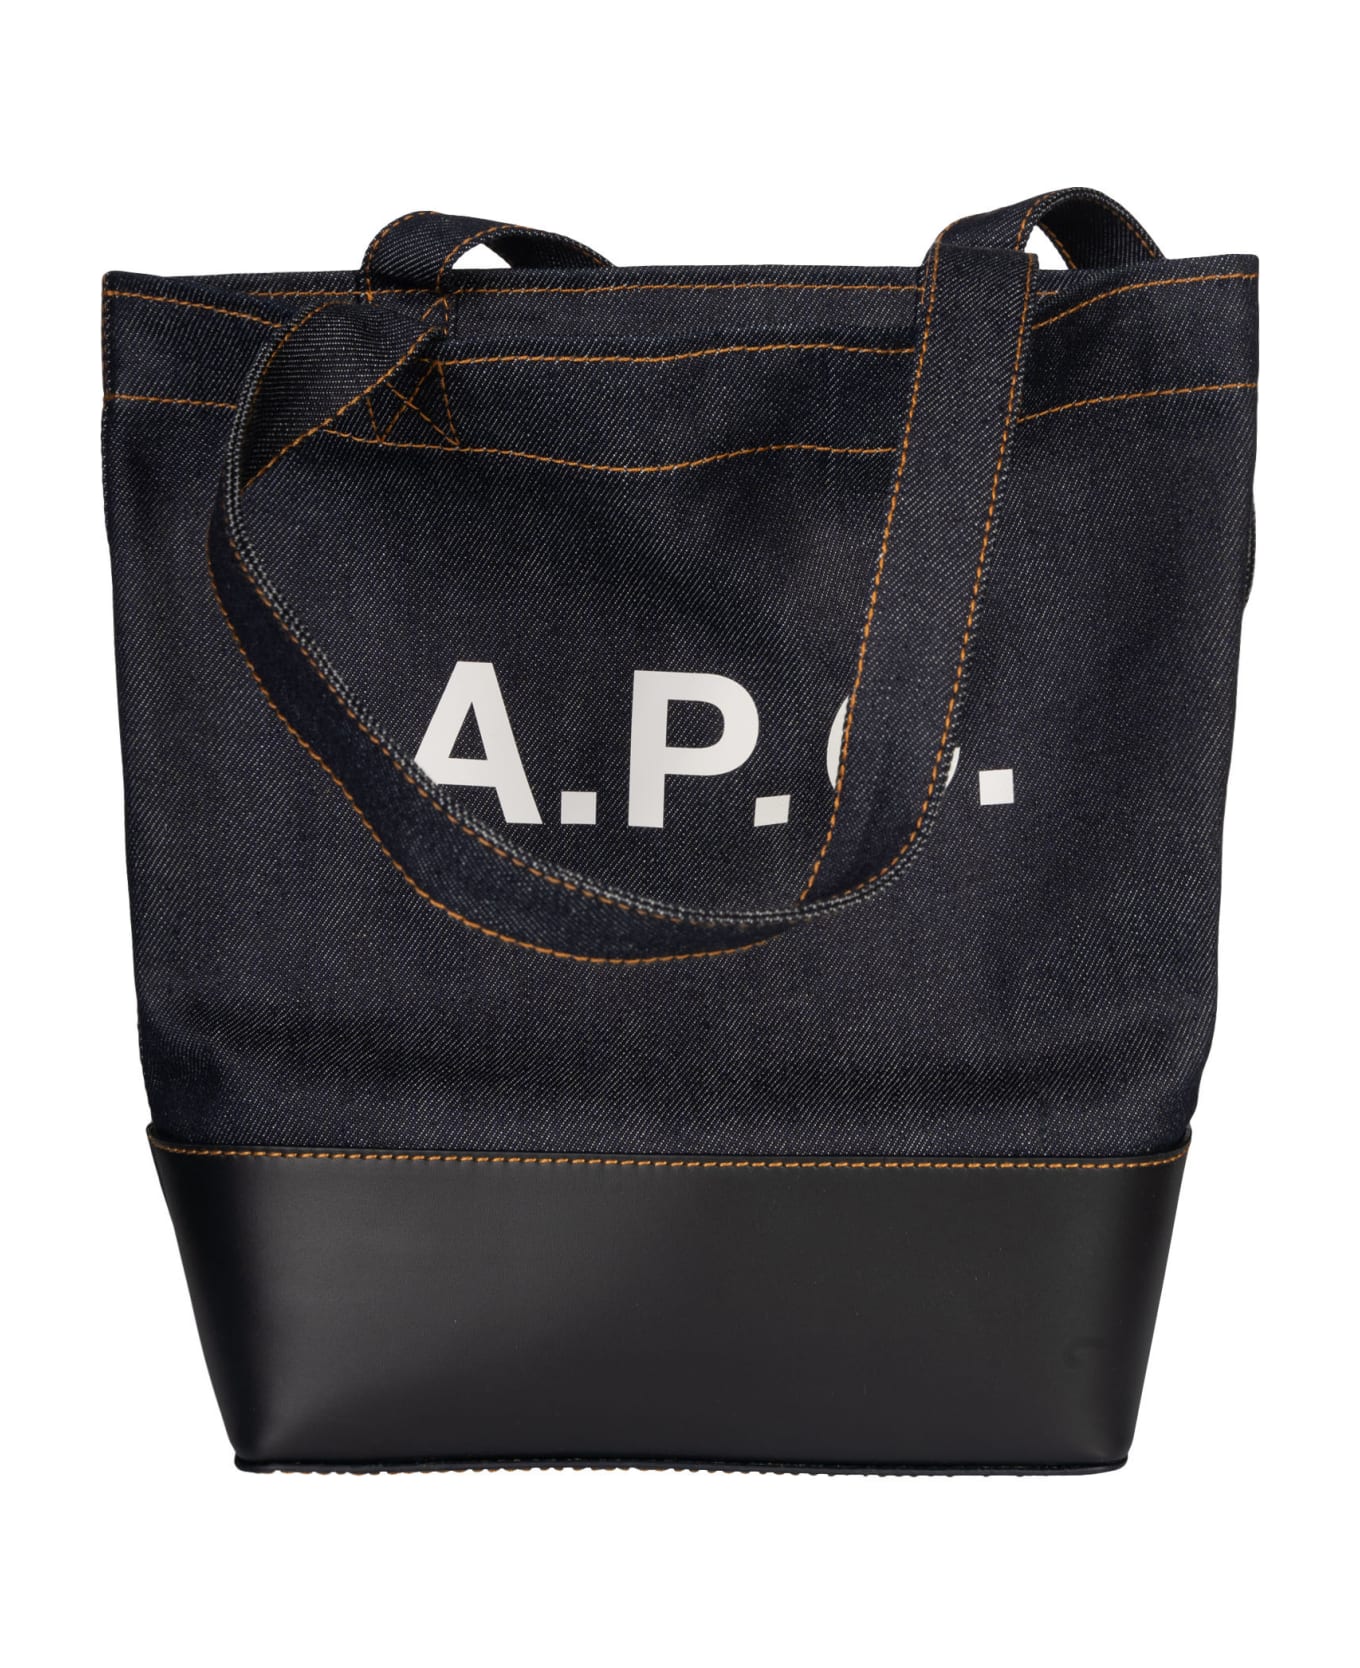 A.P.C. Axelle Tote Bag - Blue トートバッグ